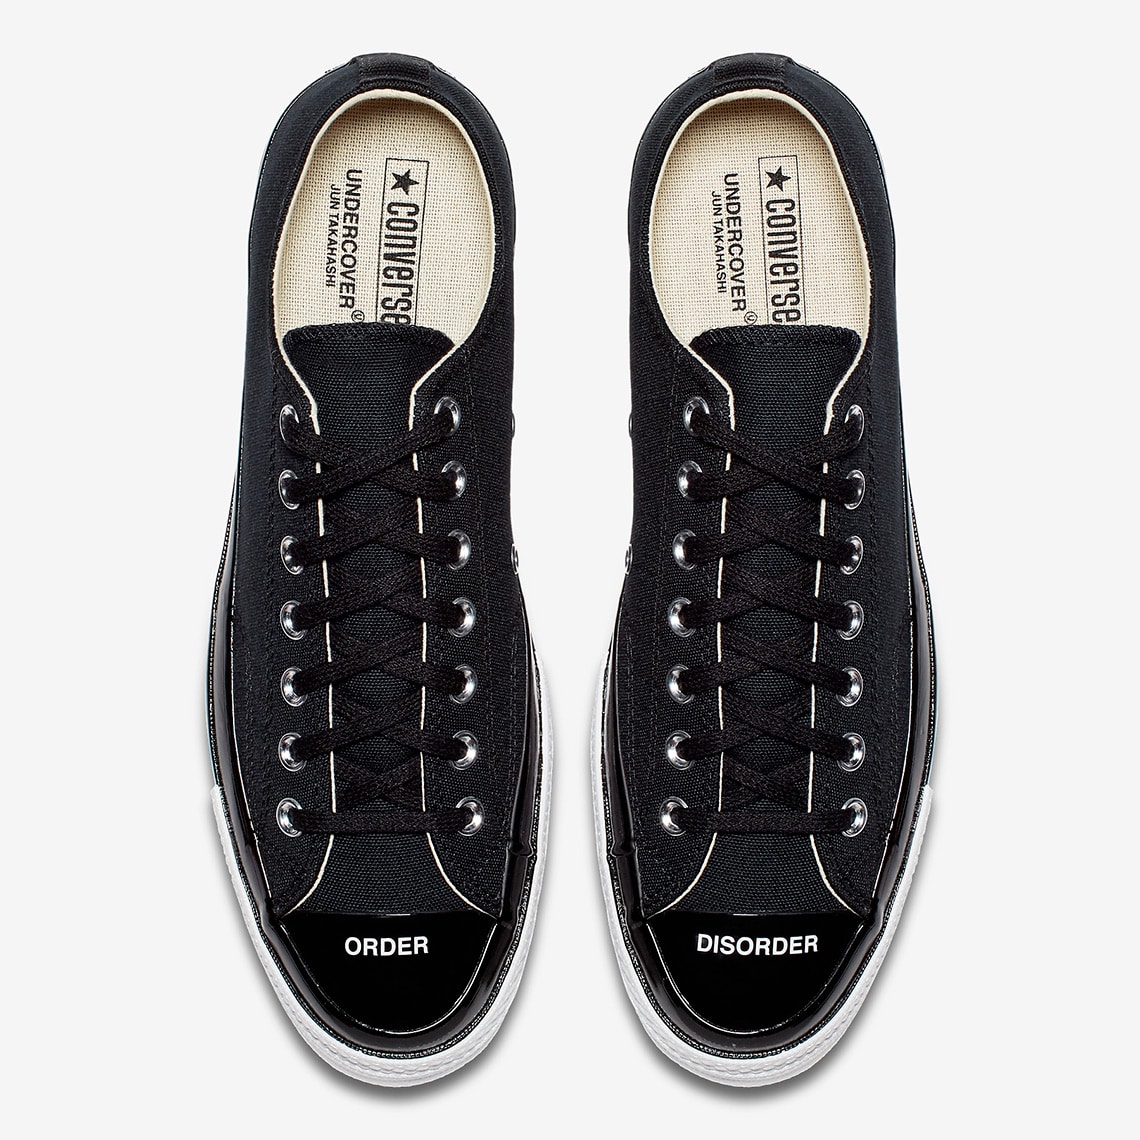 Undercover x Converse Chuck 70 Low Order and Disorder-8